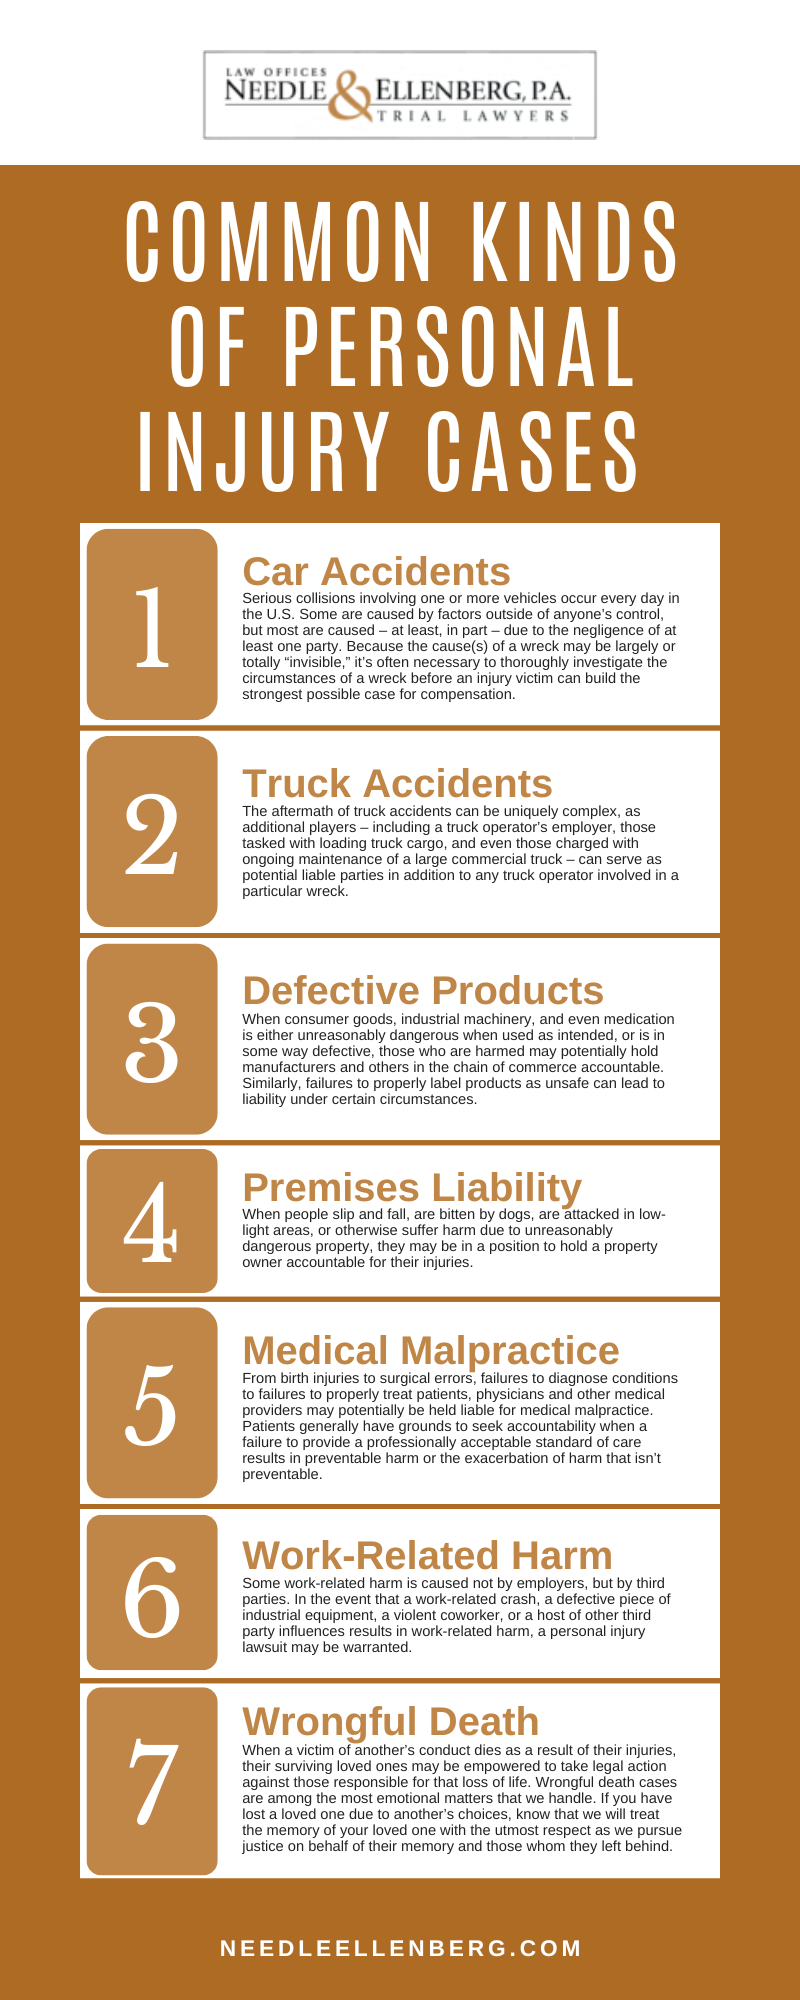 Common Kinds of Personal Injury Cases Infographic